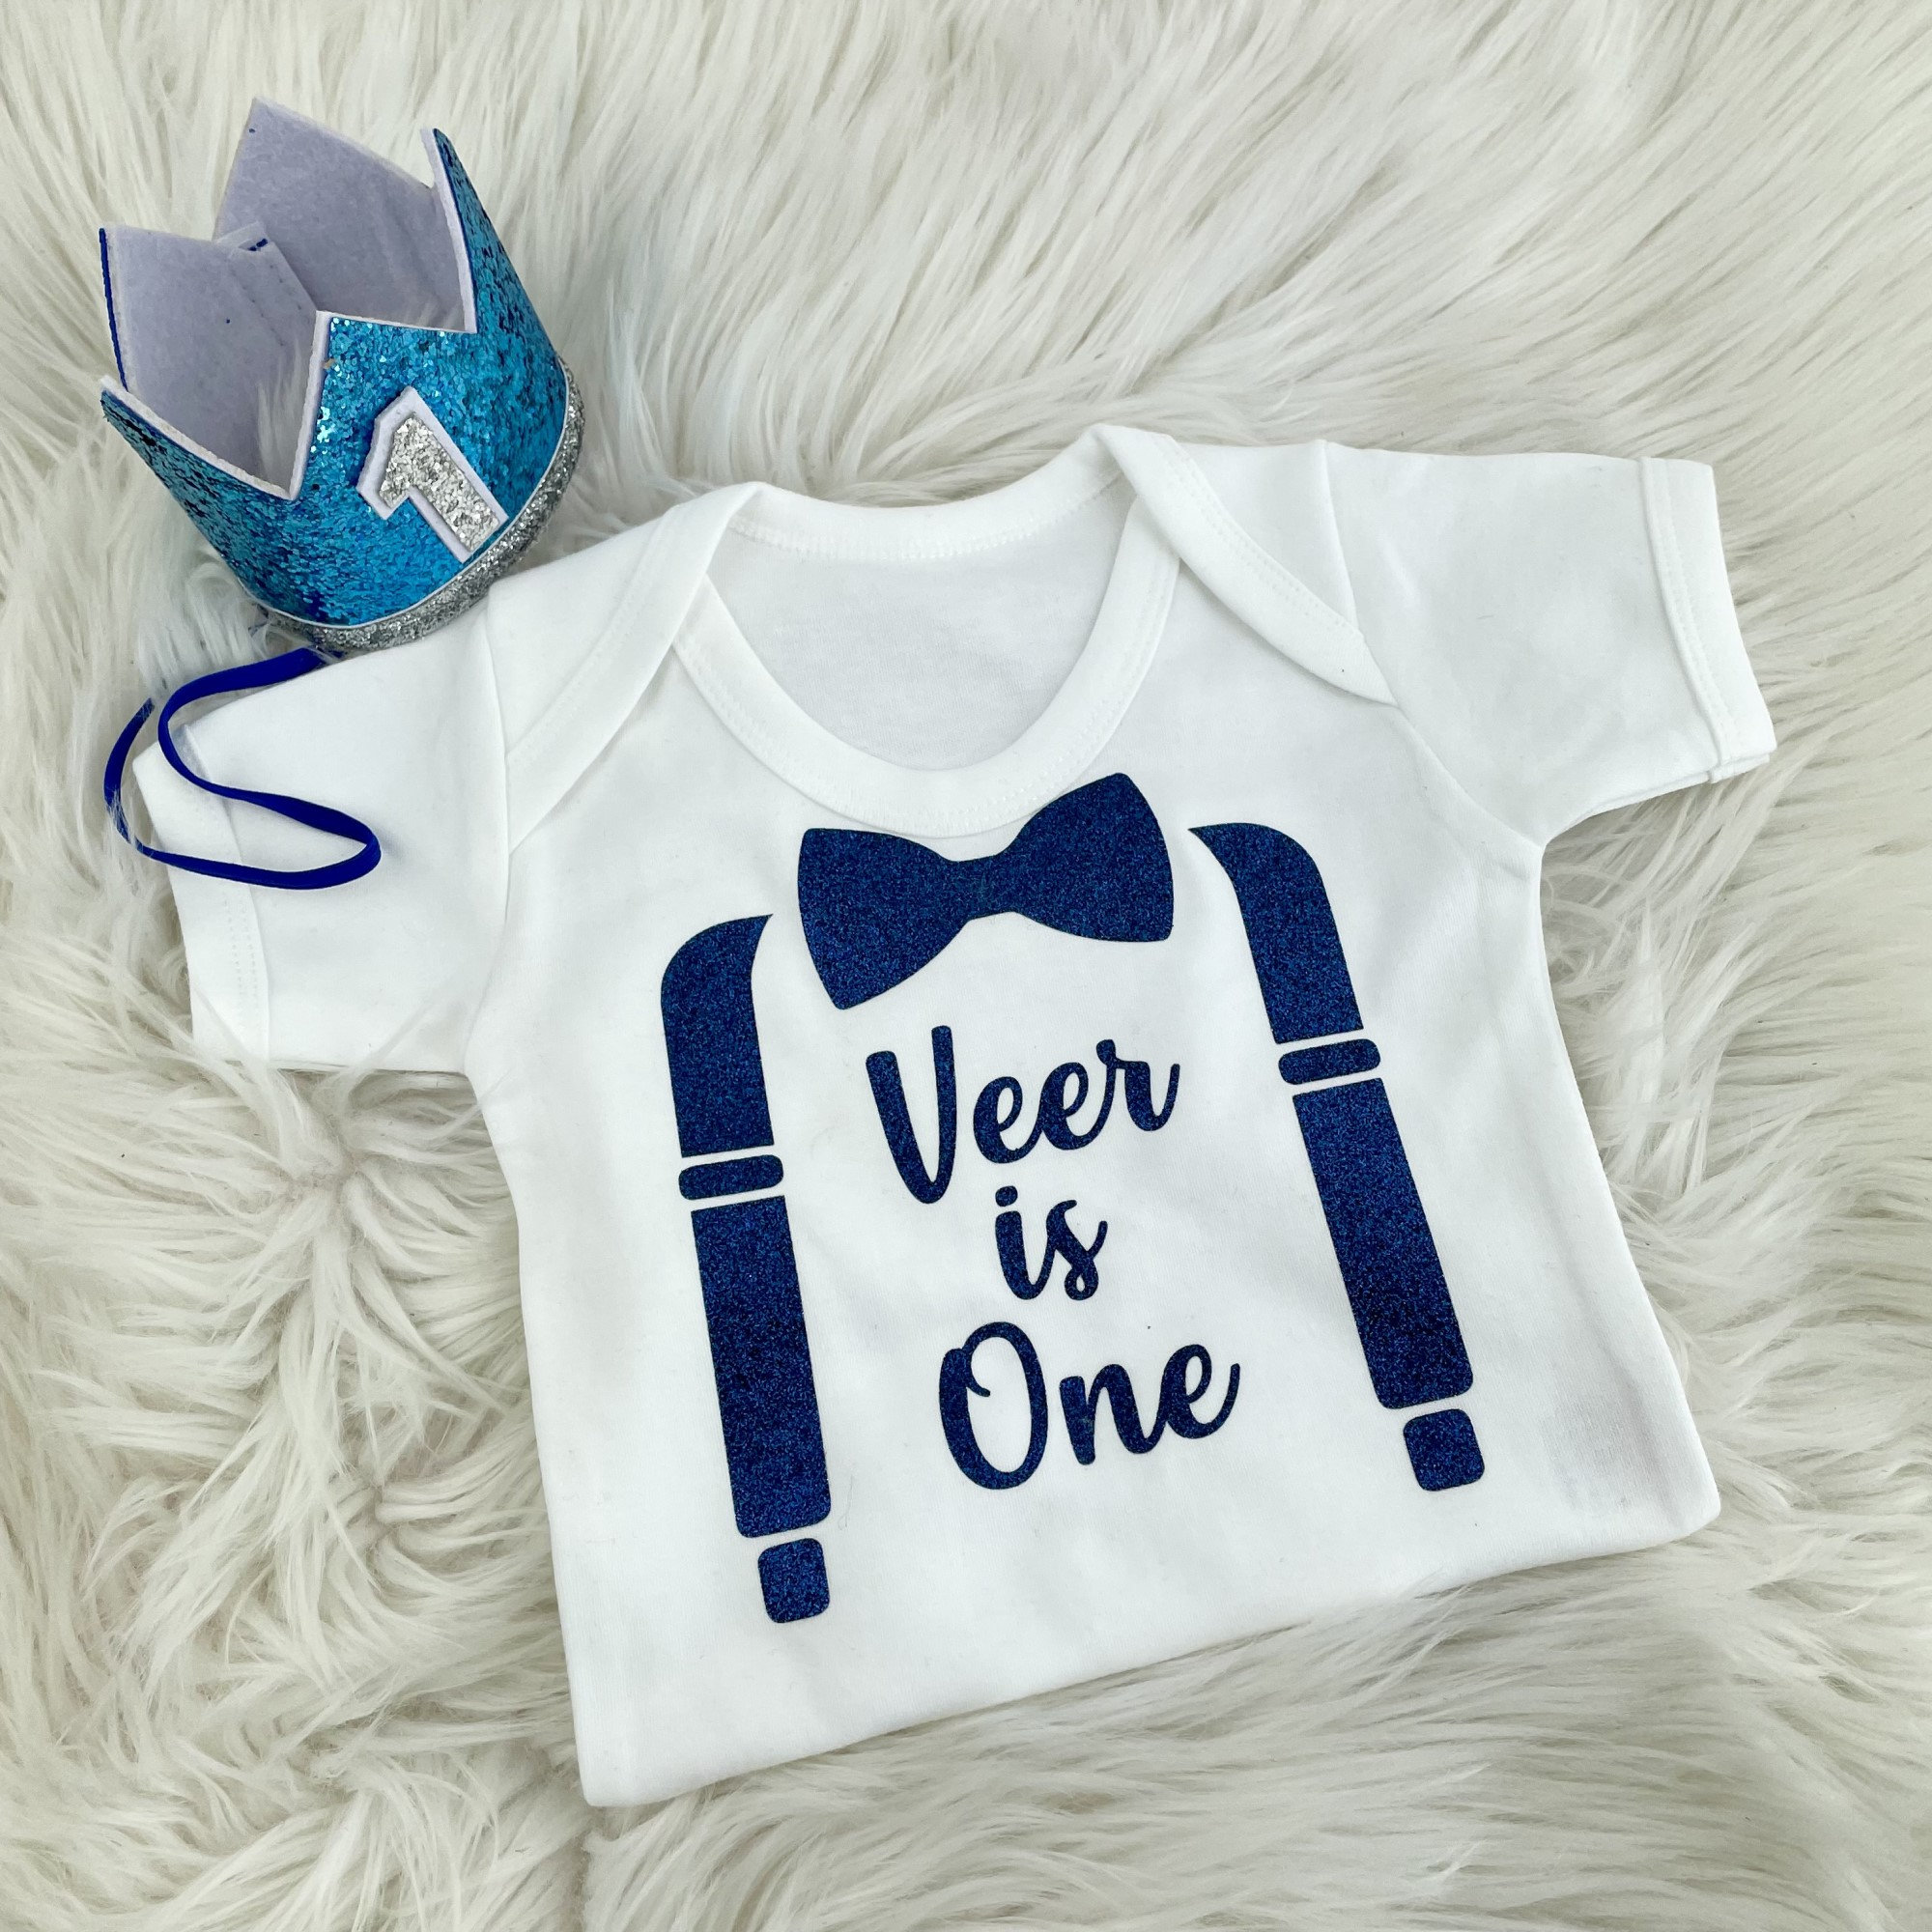 First birthday vest cake smash outfit Clothing Boys Clothing Baby Boys Clothing Vests personalised name and number with a crown vest baby boy birthday outfit 